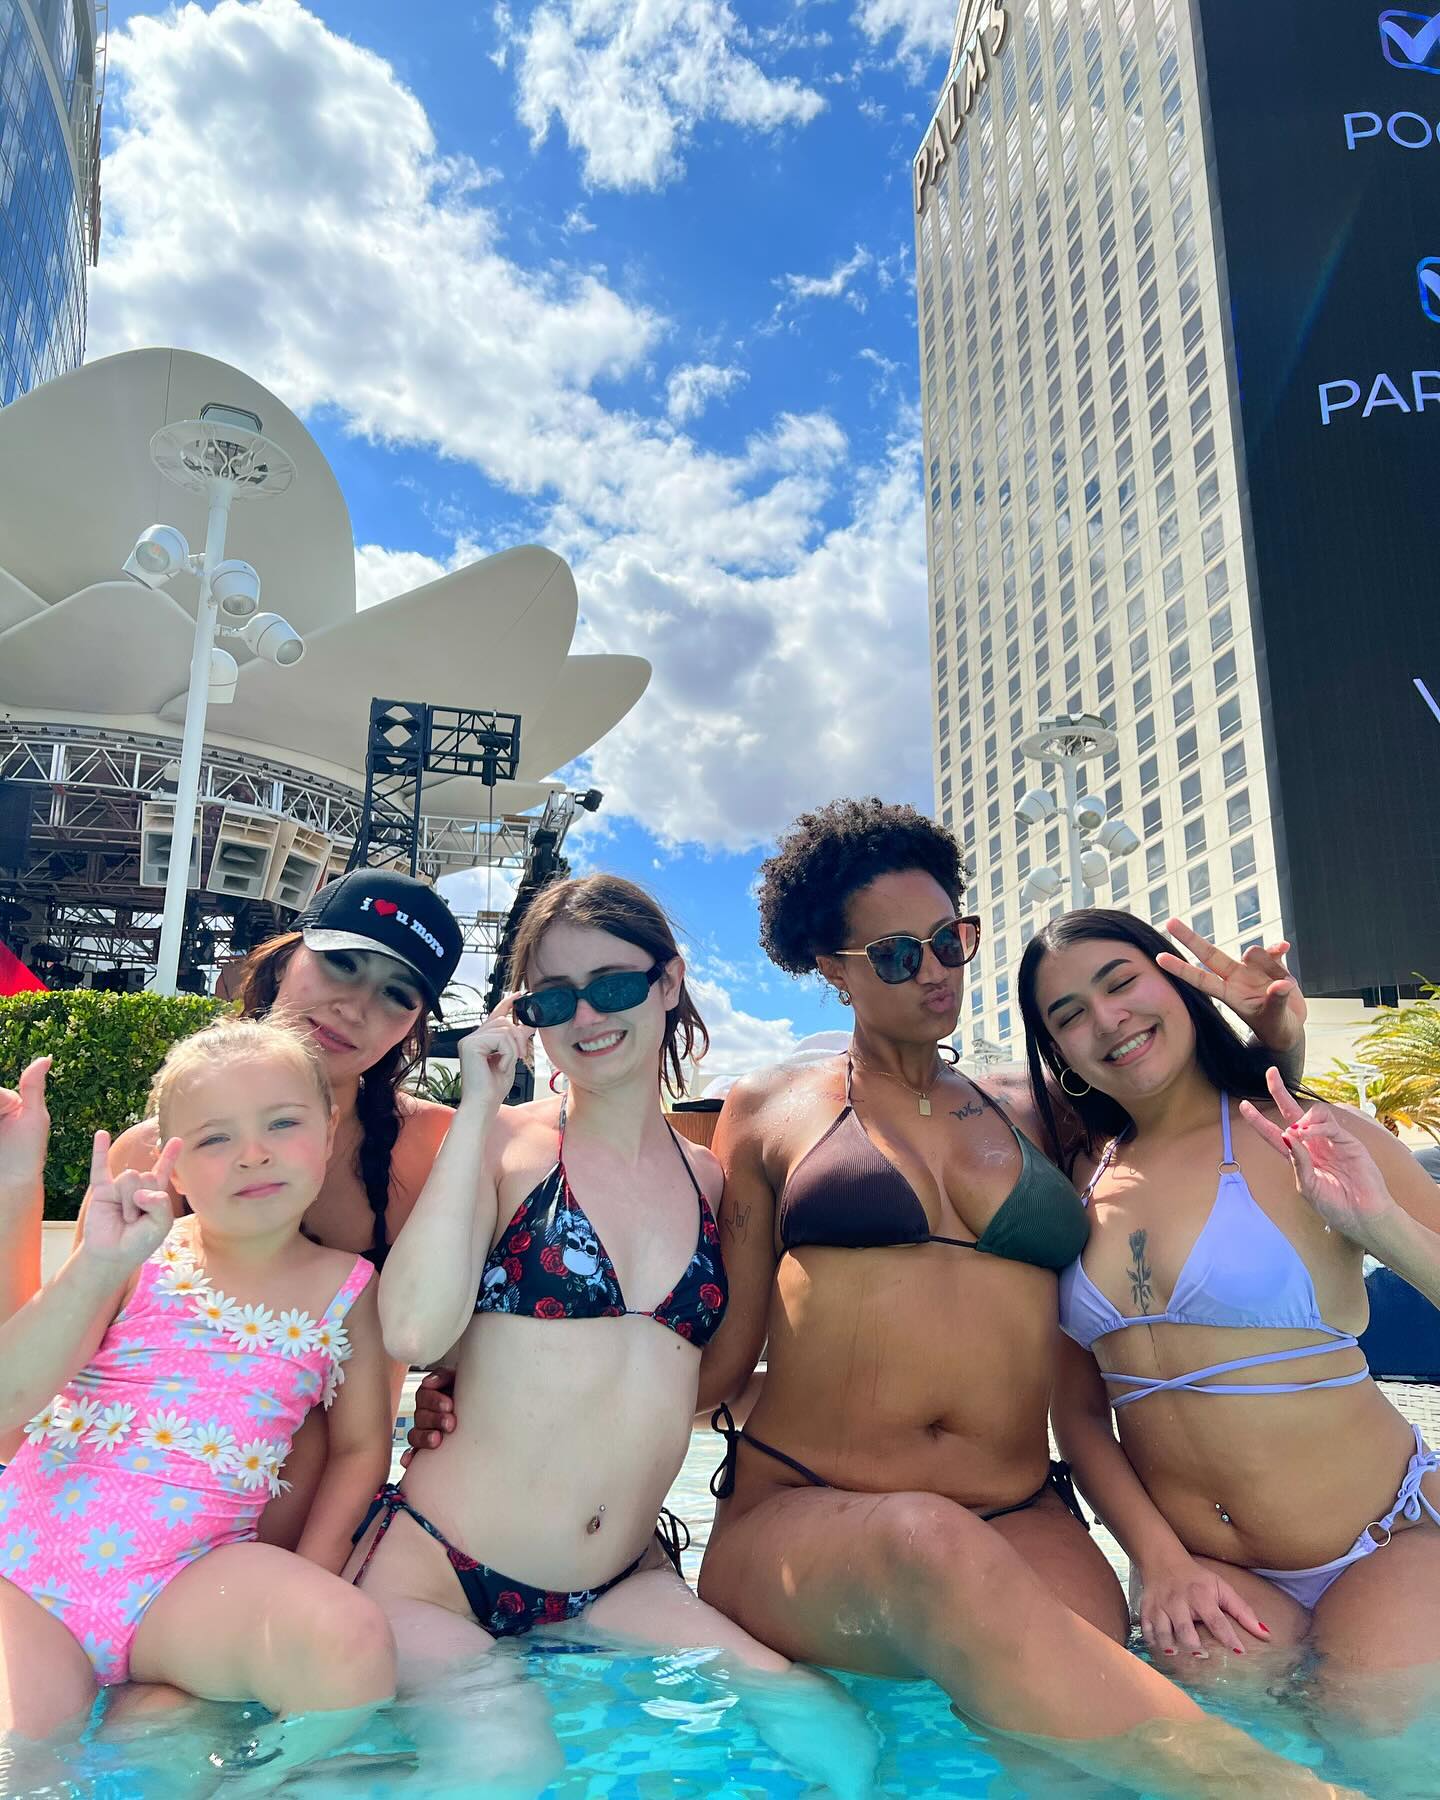 Ready for summer and pool days with the girls 💕🏊☀️
•
•
•
•
•
@palms @palmspoollv 
•
#thepalms #palms #palmslv #palmslasvegas #thepalmspool #palmspool #lasvegas #vegas #pool #pools #poolday #girlsday #thursday #girls #summer #beginningofsummer #goodvibes #explore #explorepage #explorepage✨ #fy #lasvegaslocals #vegaslocal #pooltime #pool🏊 #swimmingpool #summervibes #summertime #summerday #dayclub